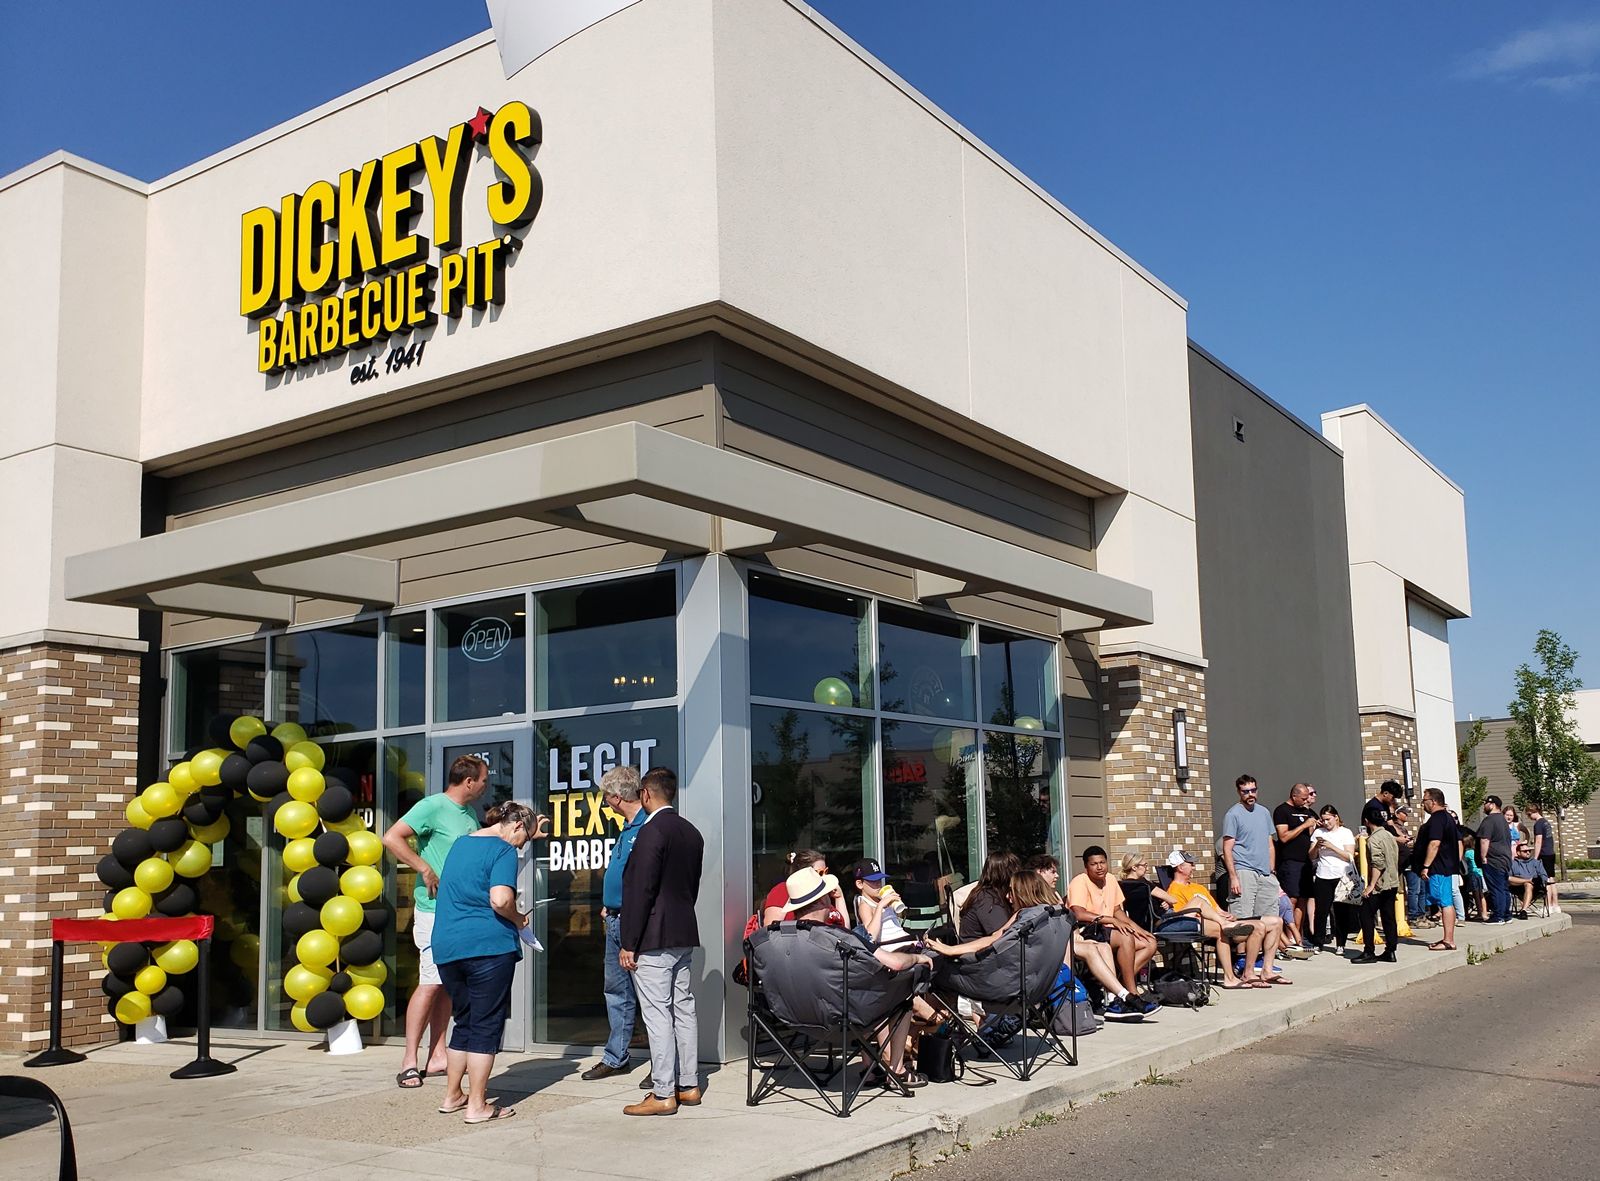 Dickey's Barbecue Pit Builds Excitement for Legit. Texas. Barbecue. With New Location in Canada